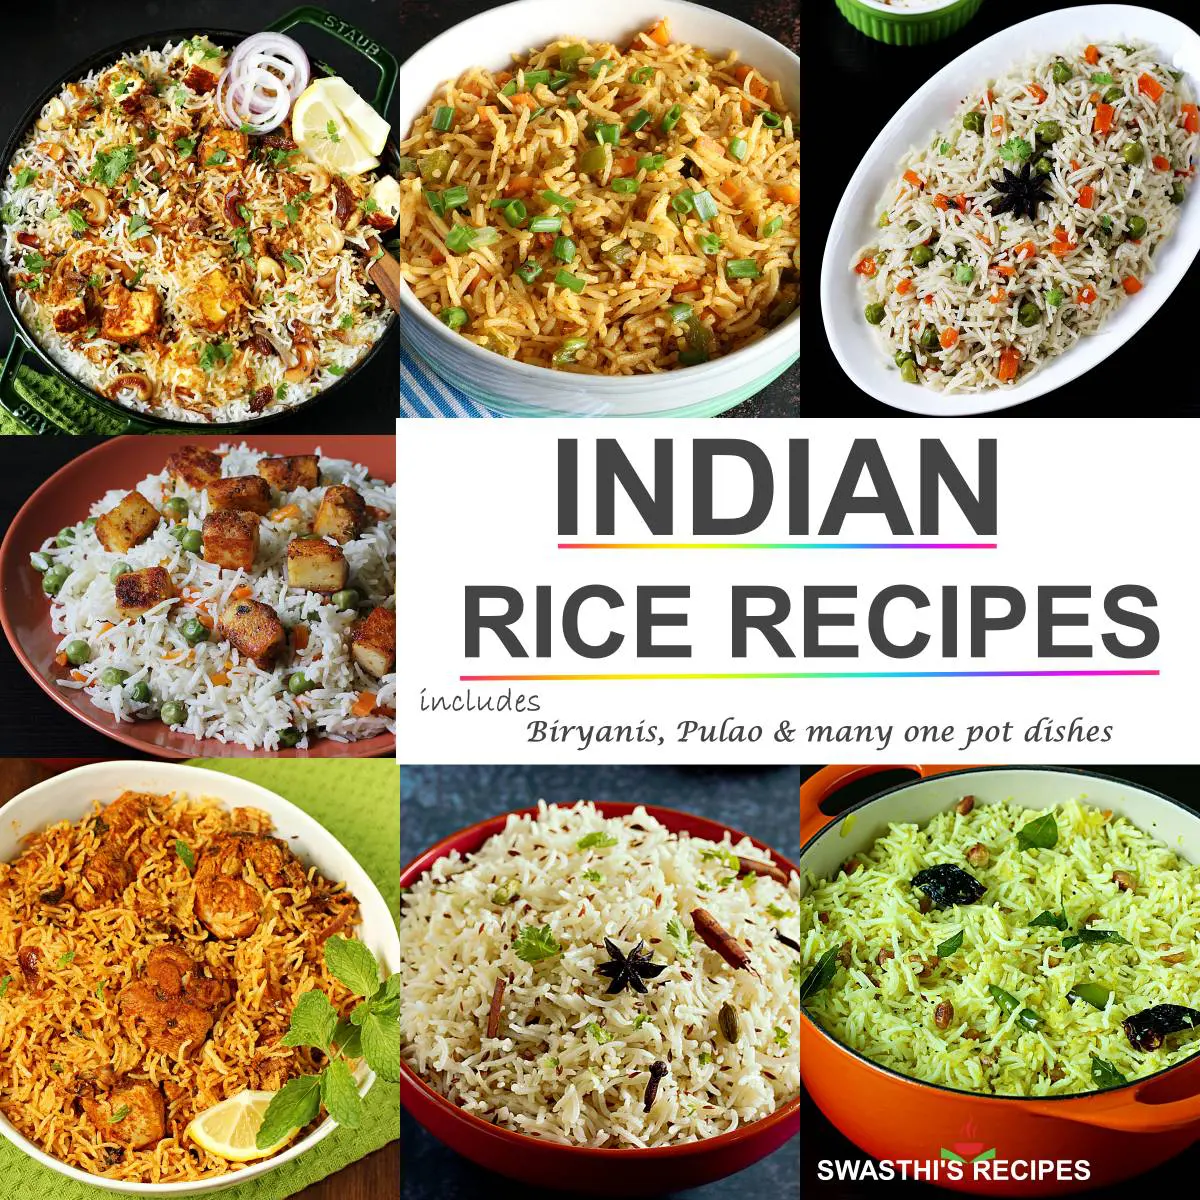 Indian rice dishes